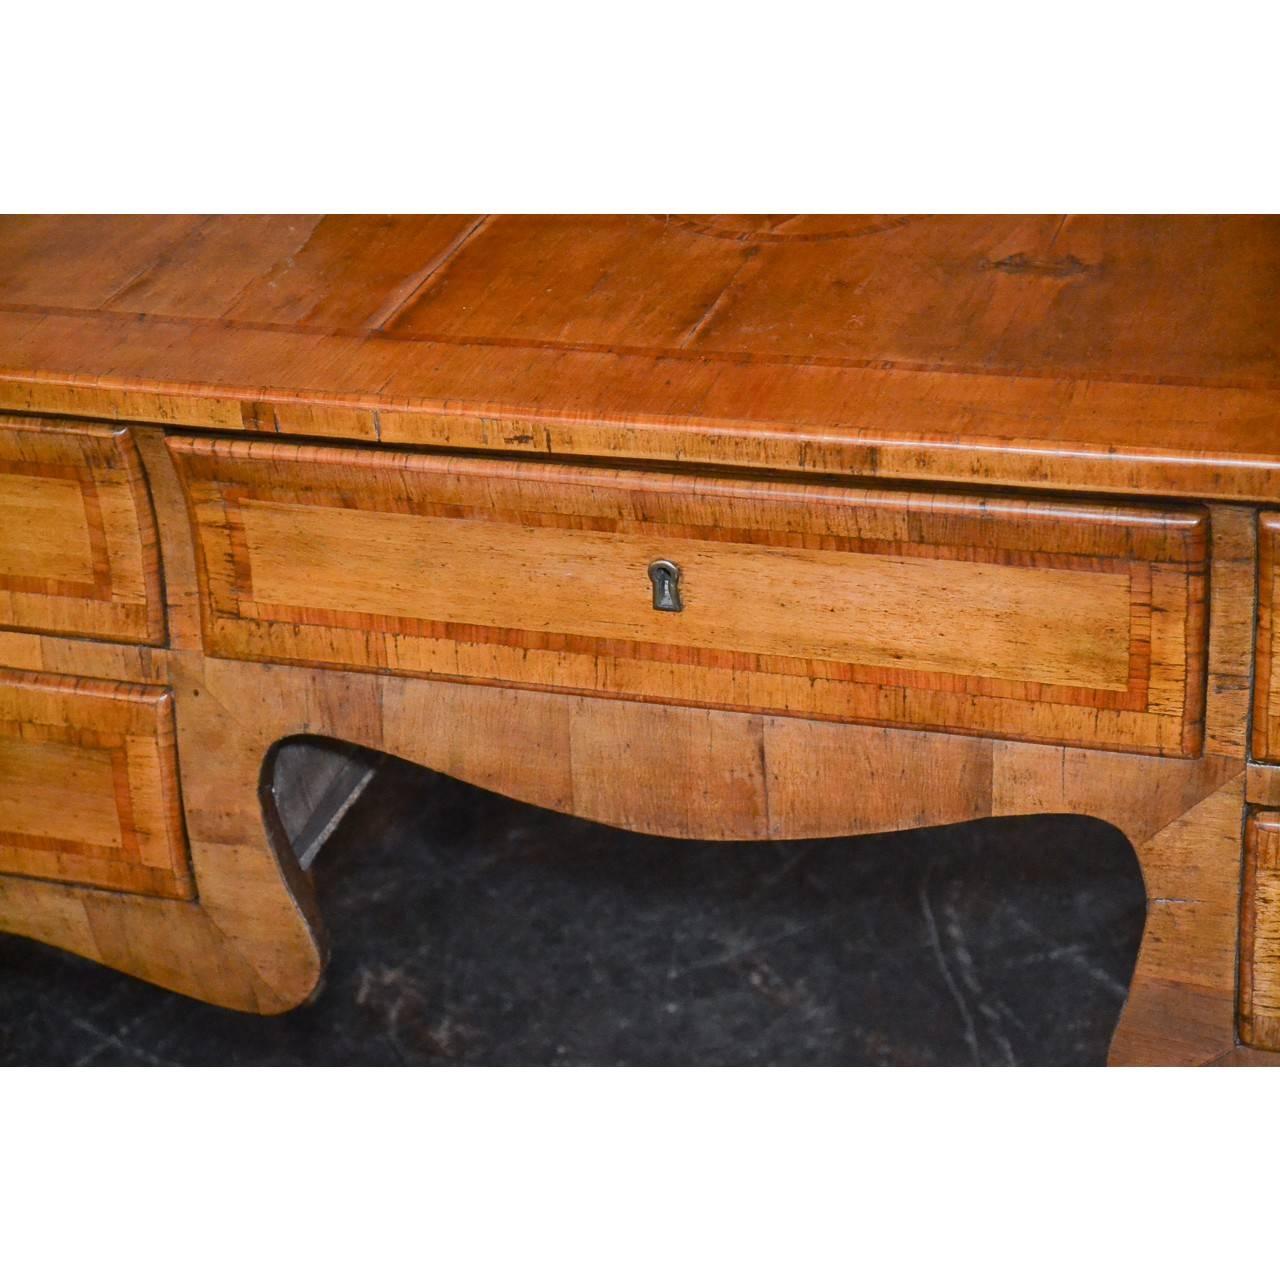 Outstanding 19th century Italian burl walnut and satinwood banded writing desk with old rich patina. The top and sides inlaid with star-like design inlays. The knee-hole nicely contoured and fitted with five drawers. The entire on sleek and graceful